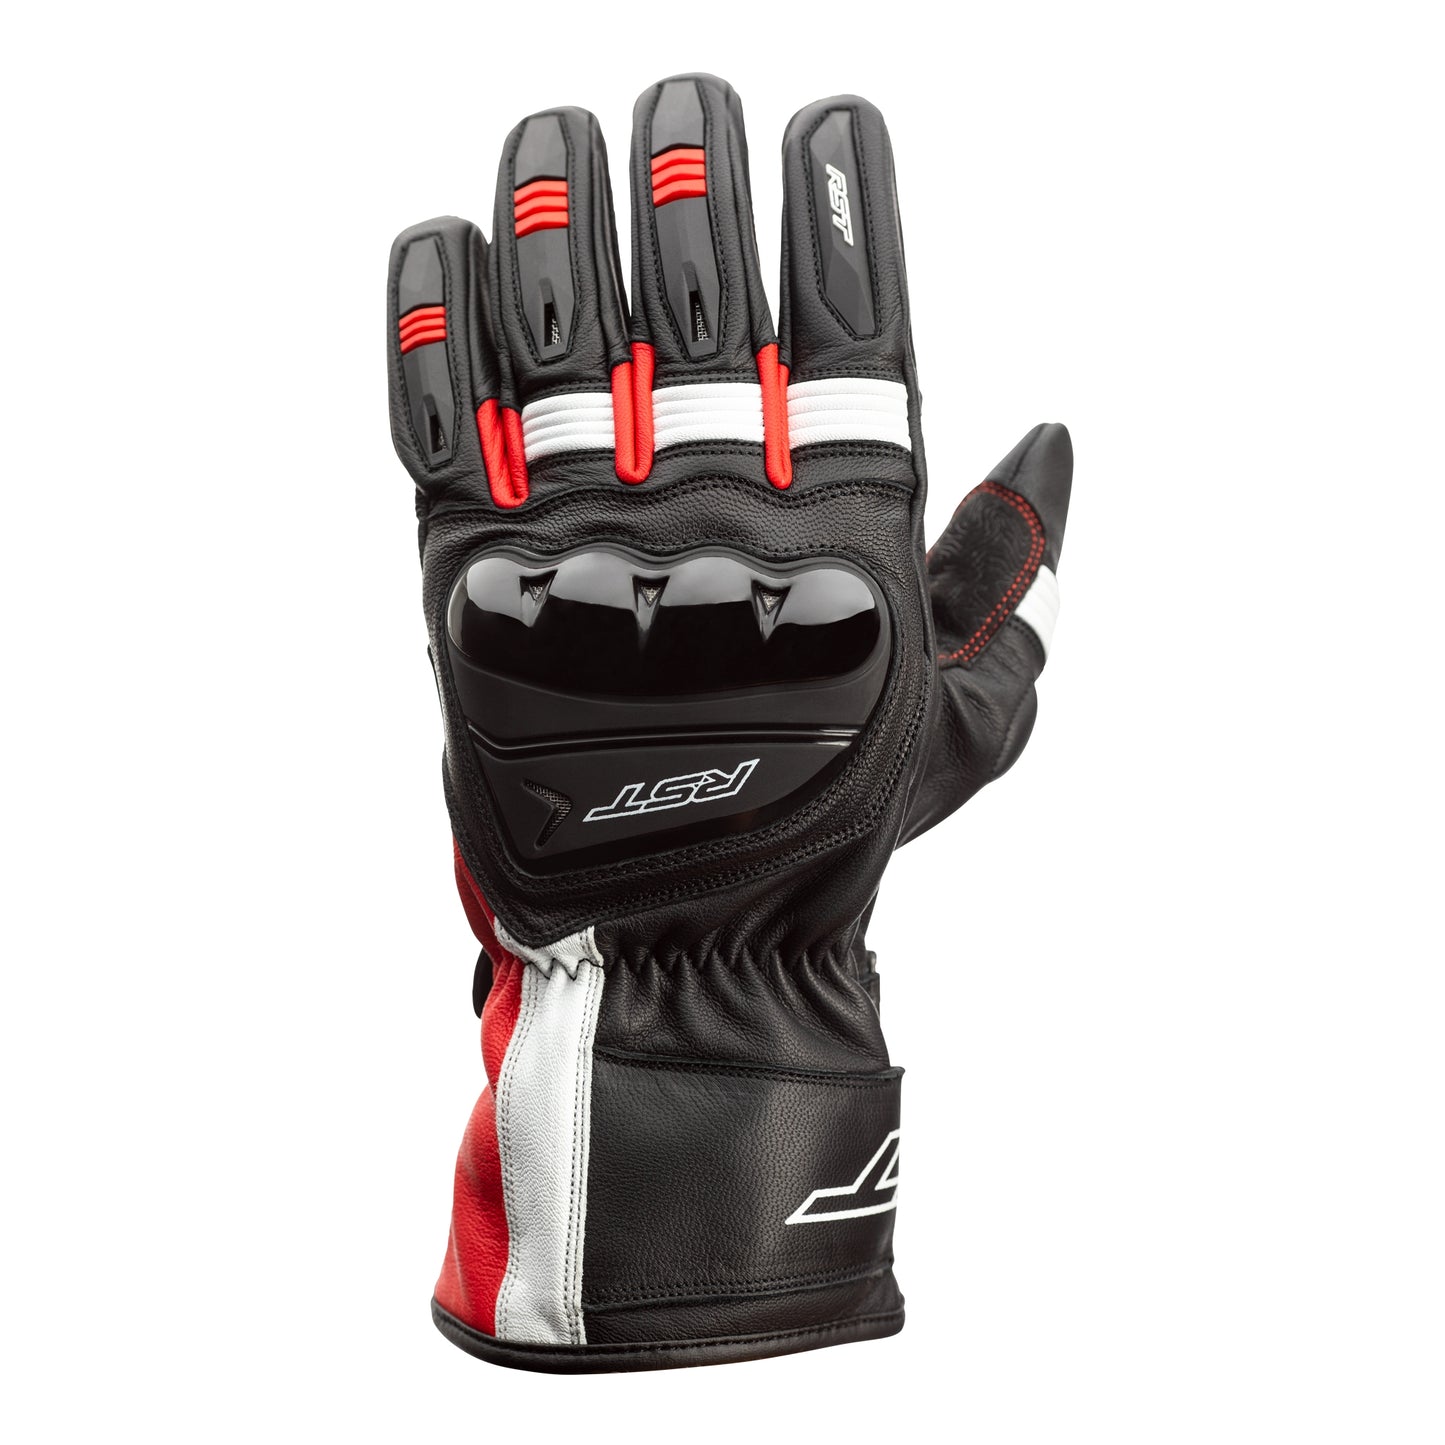 RST Pilot Leather Riding Gloves - CE APPROVED - Black/Red/White